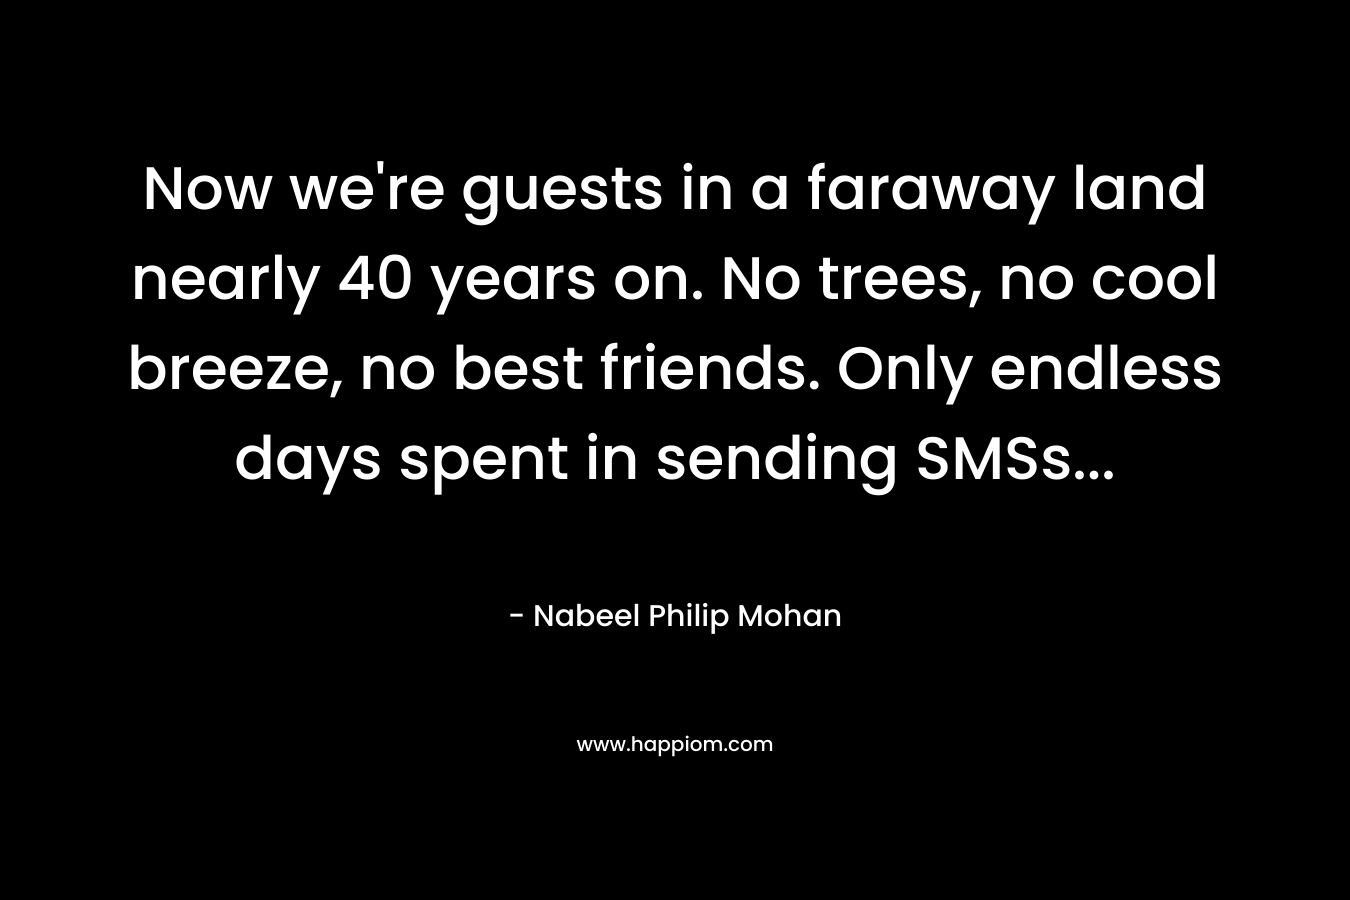 Now we’re guests in a faraway land nearly 40 years on. No trees, no cool breeze, no best friends. Only endless days spent in sending SMSs… – Nabeel Philip Mohan